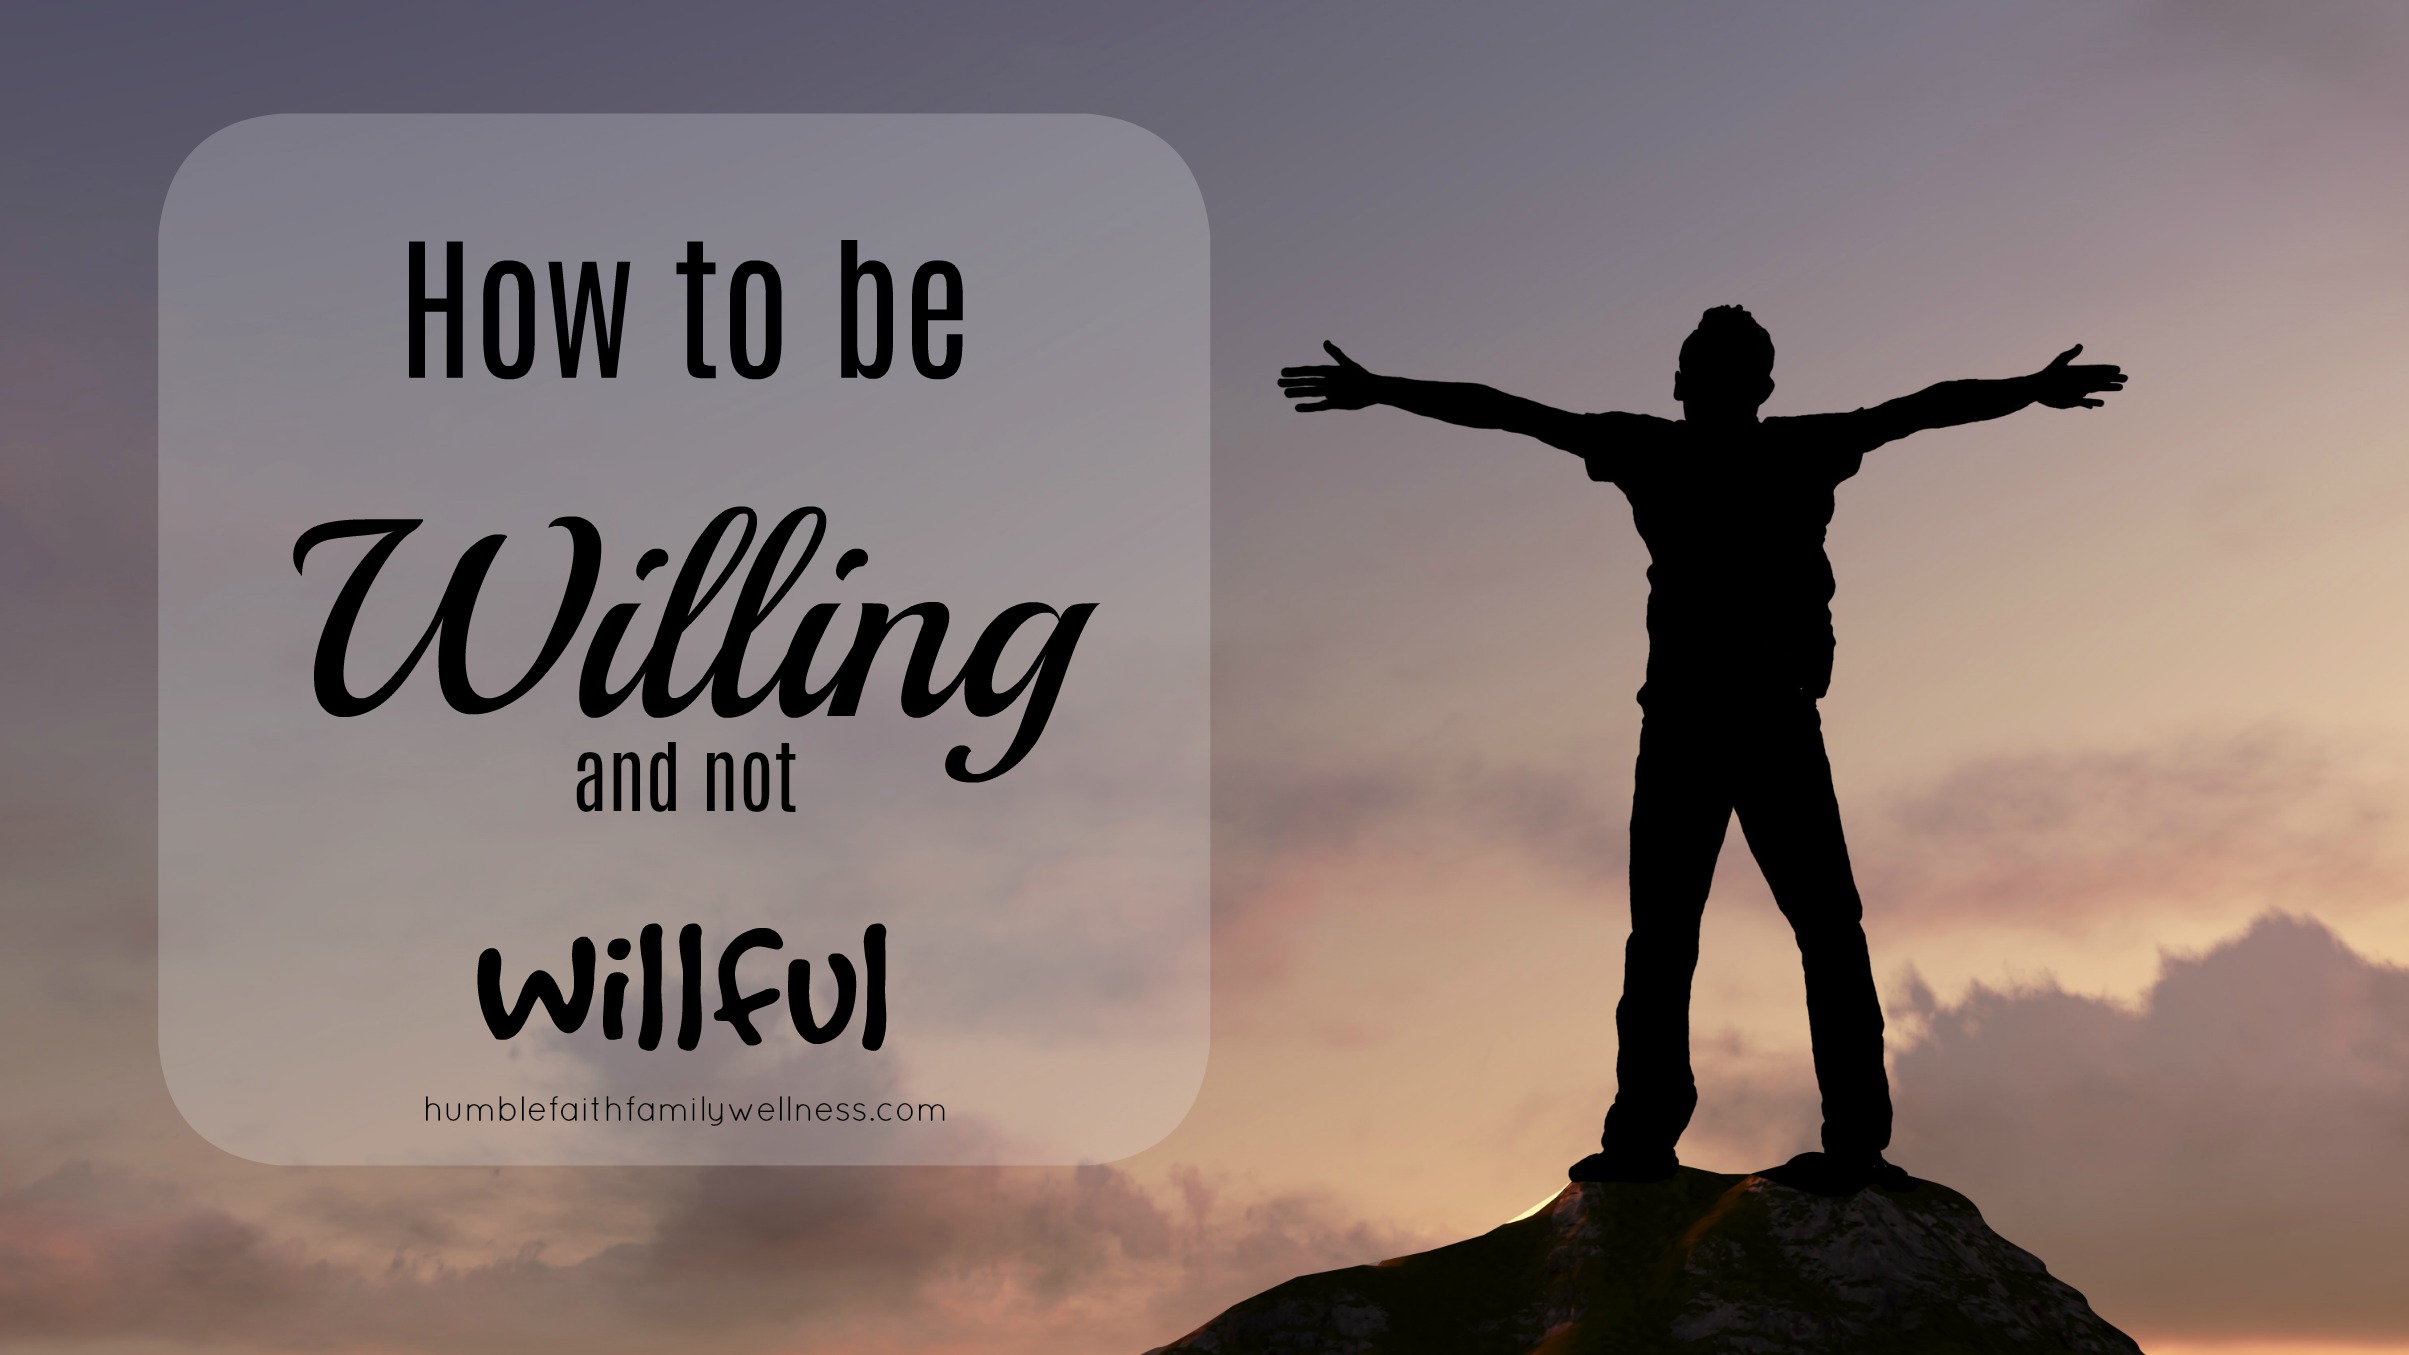 willing, allowing God control